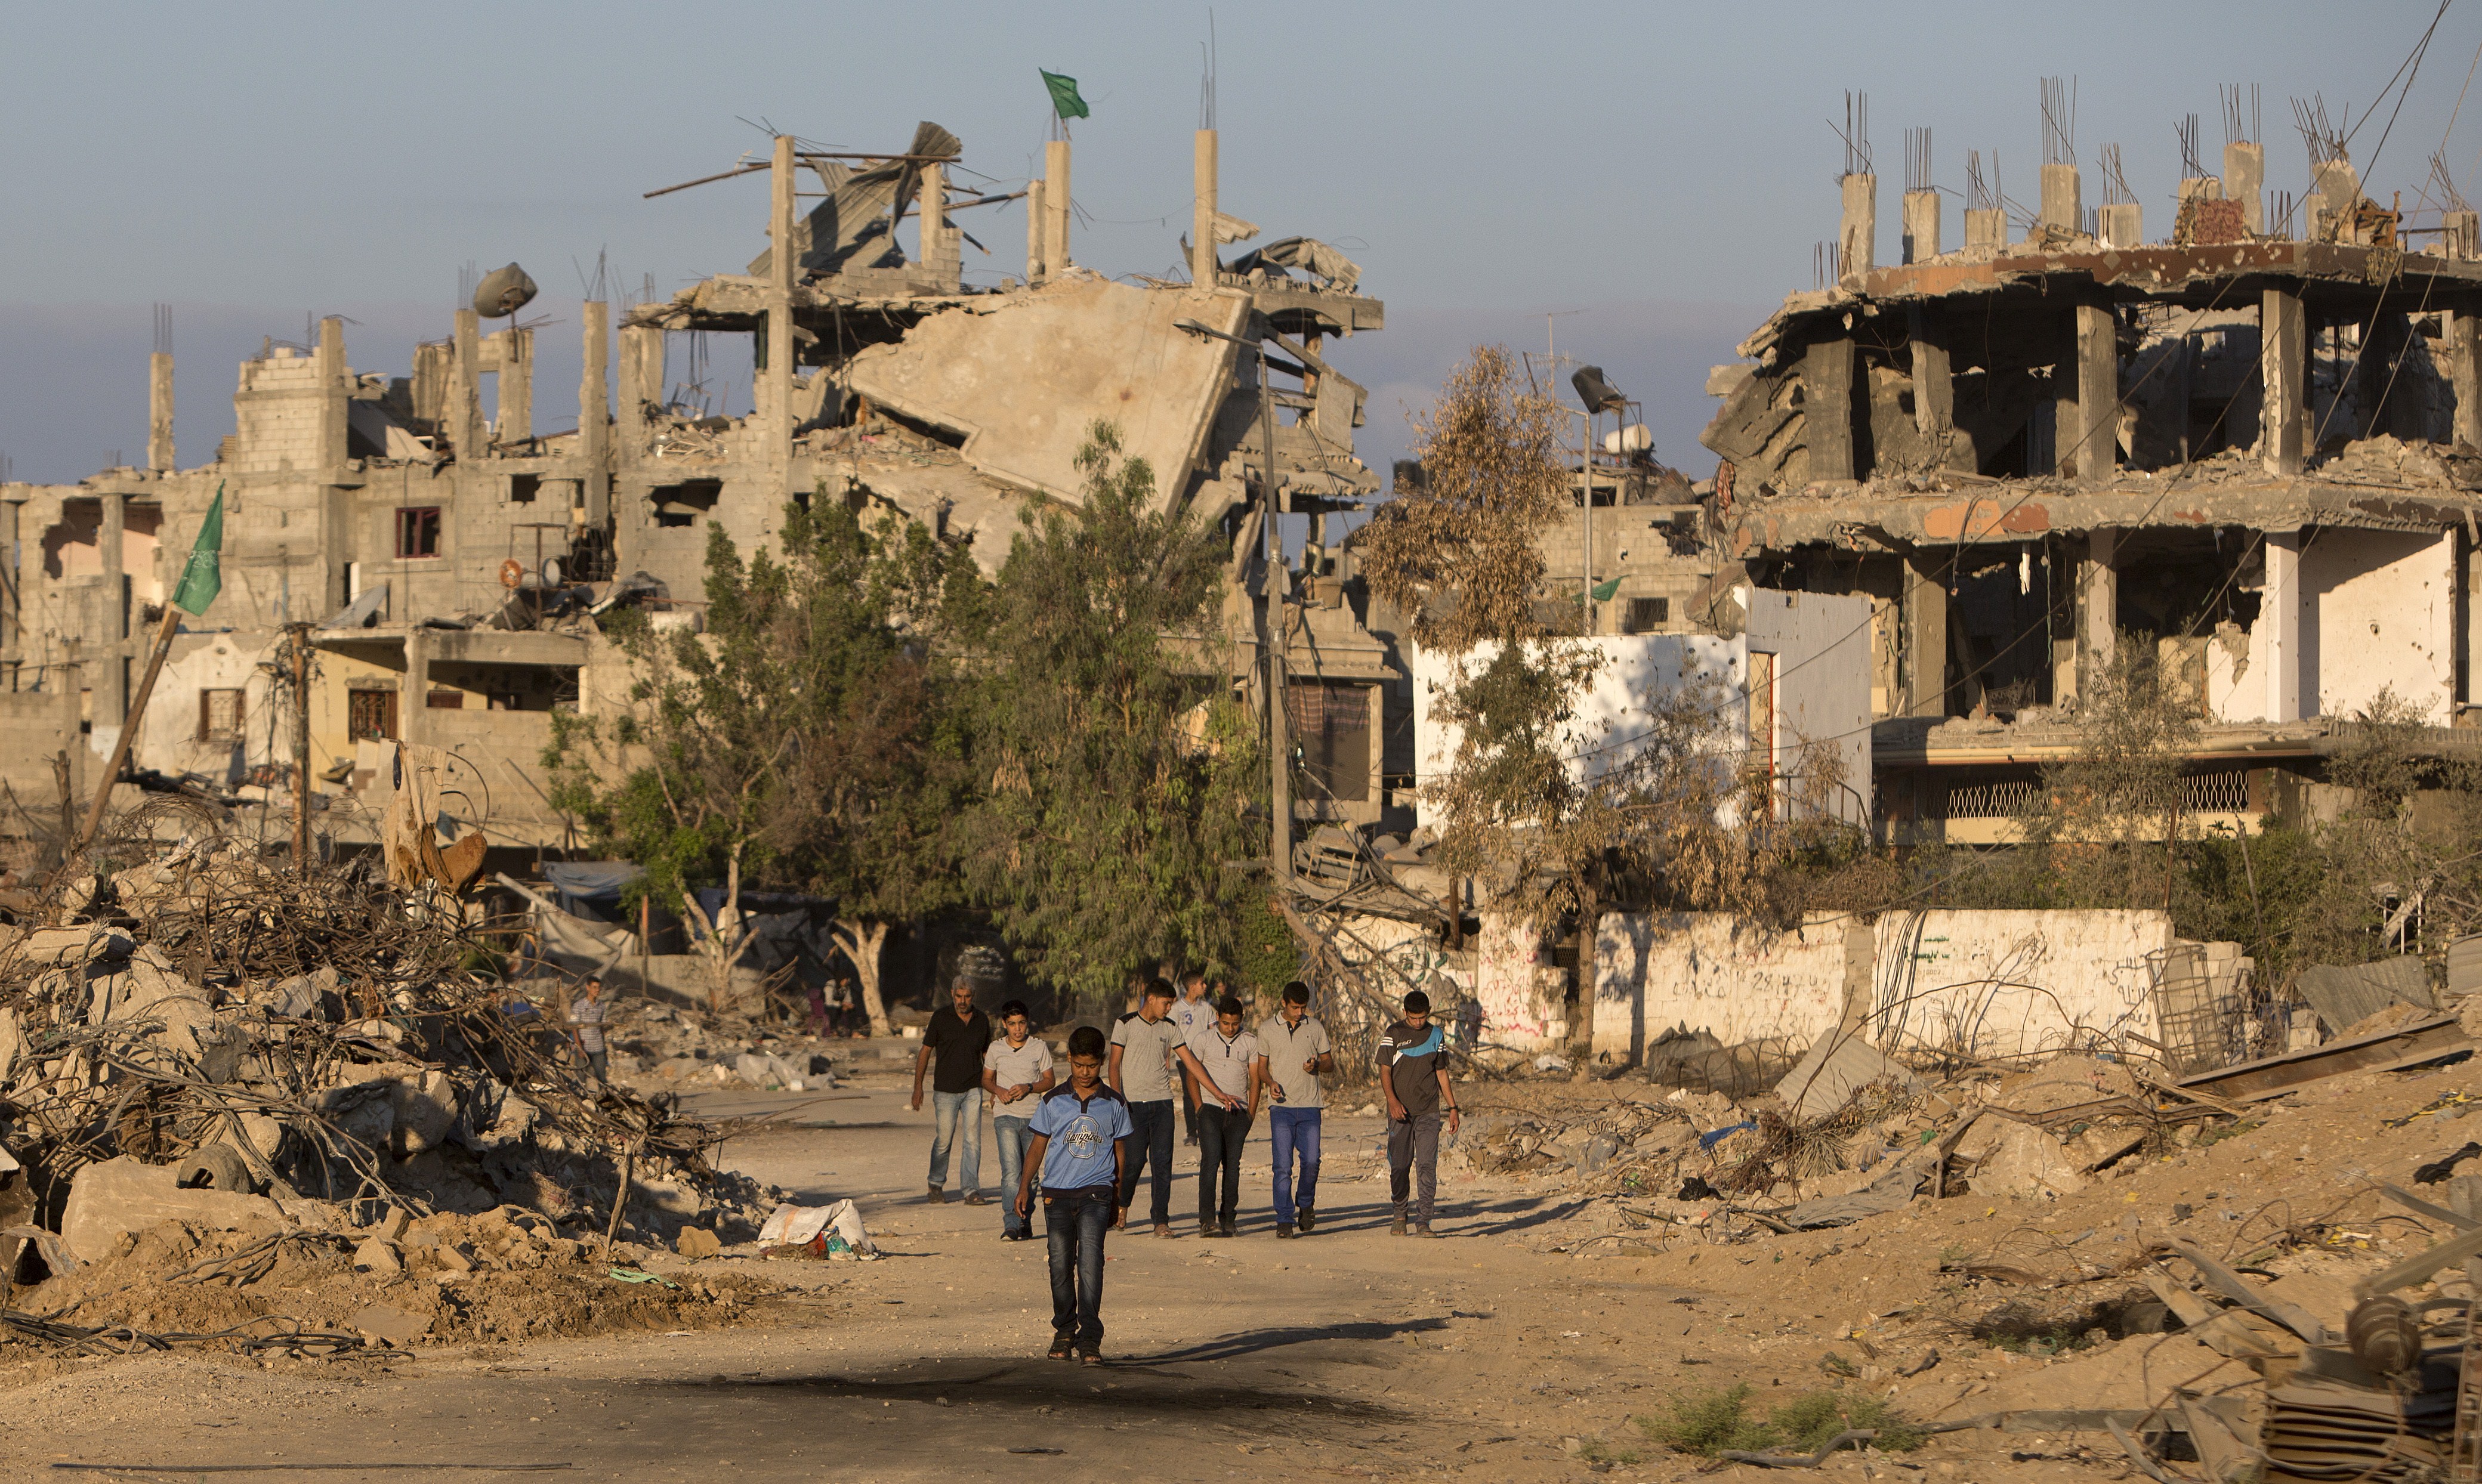 Palestinian boys walk past buildings which were destroyed by Israeli strikes on their way to school in the Shejaiya neighbourhood of Gaza City on September 14, 2014 on the first day of the new school year. (MAHMUD HAMS/AFP/Getty Images)